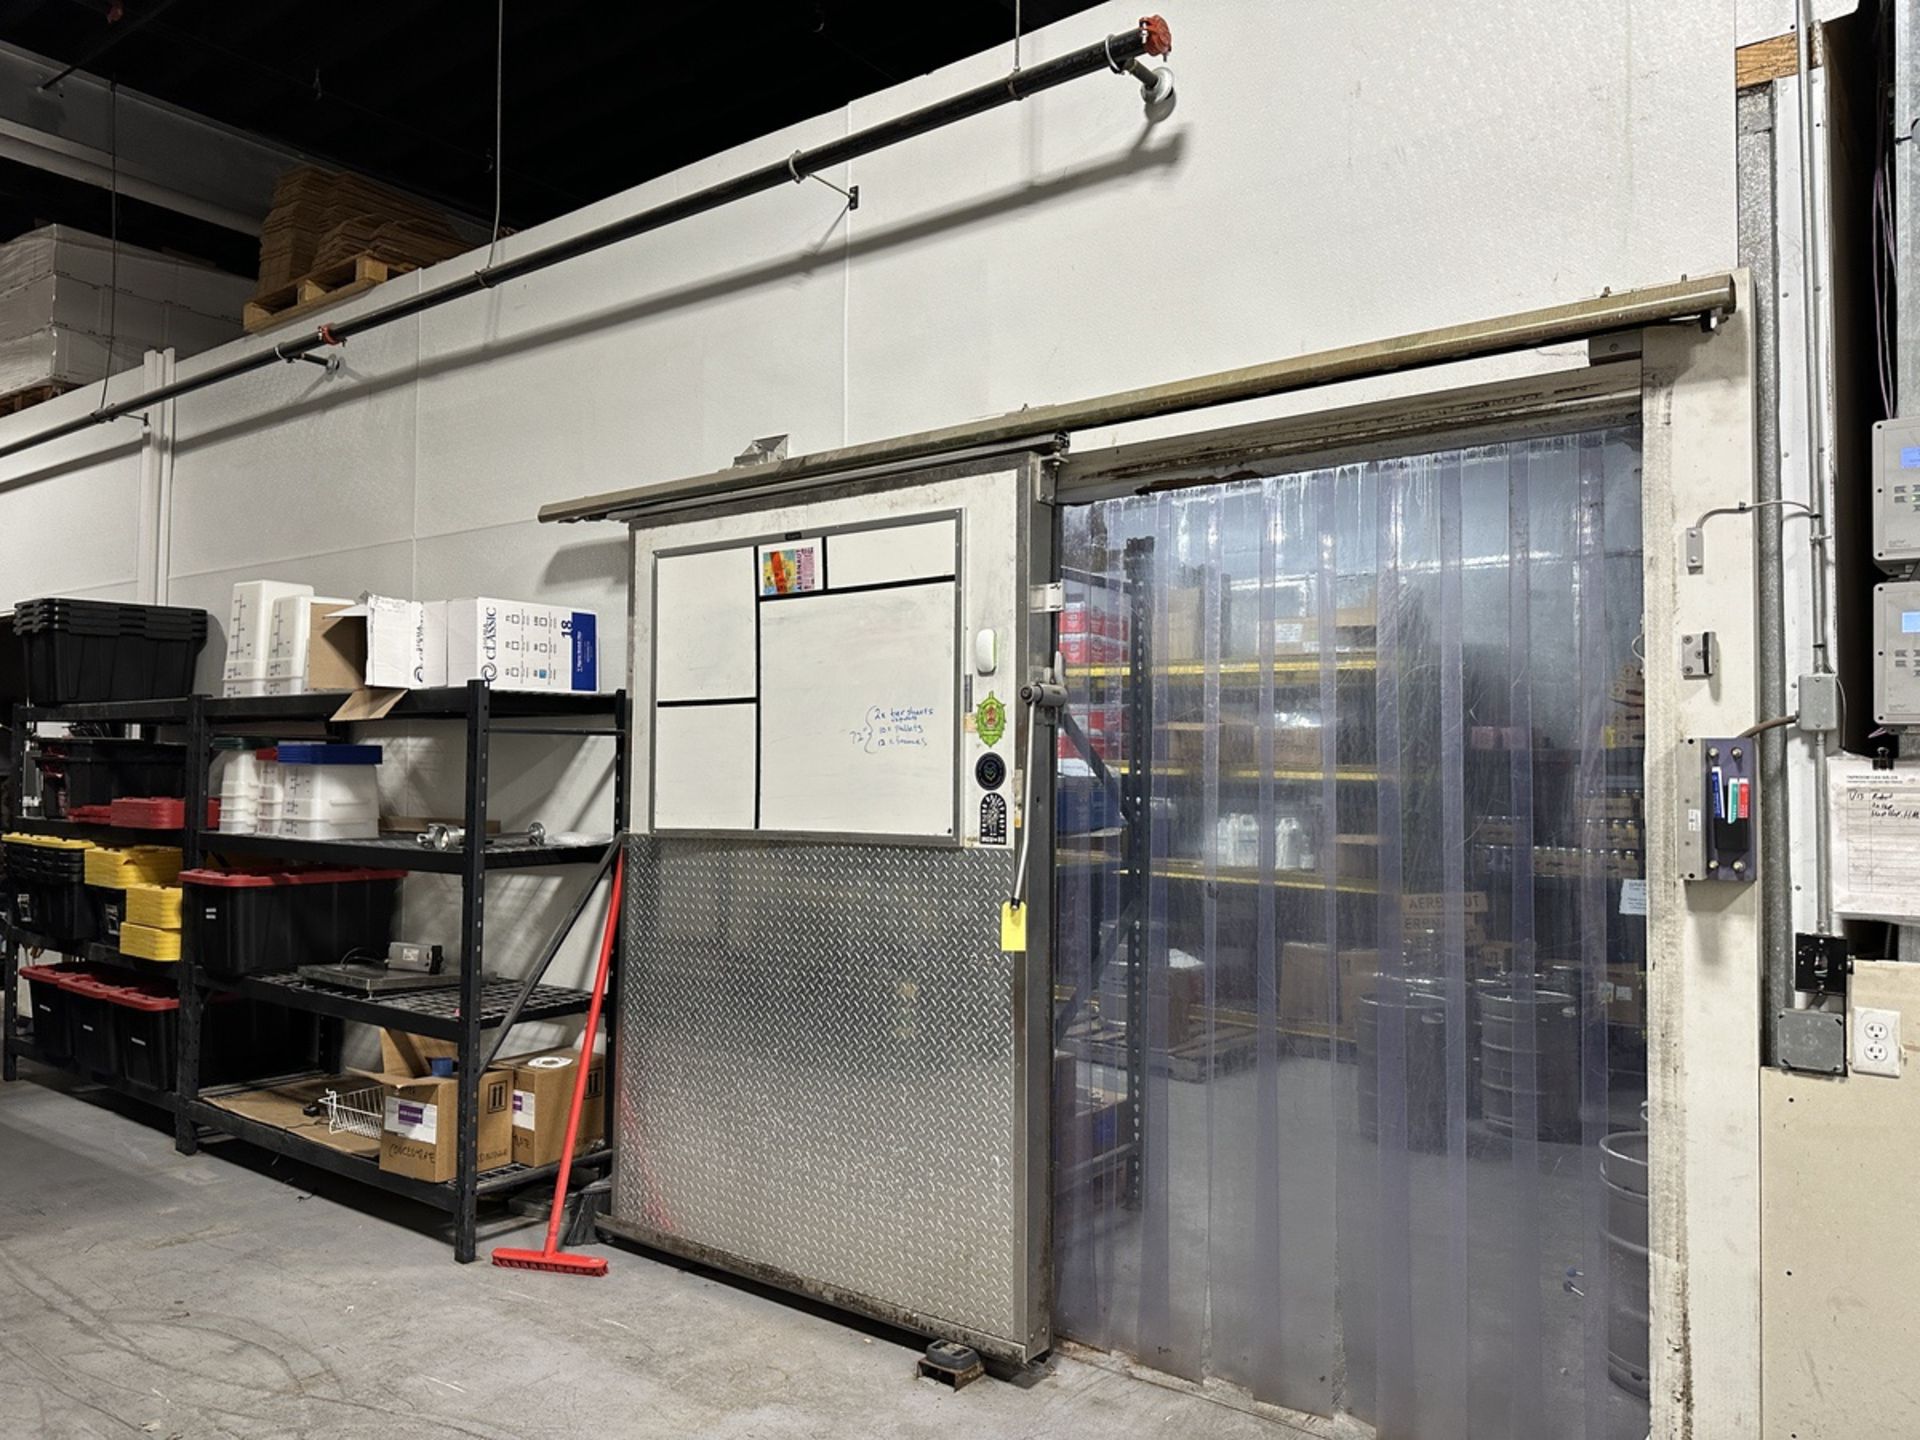 Approx. 20' x 25' Cooler with Bohn 2 blower Condenser, Sliding Door | Rig Fee $8500